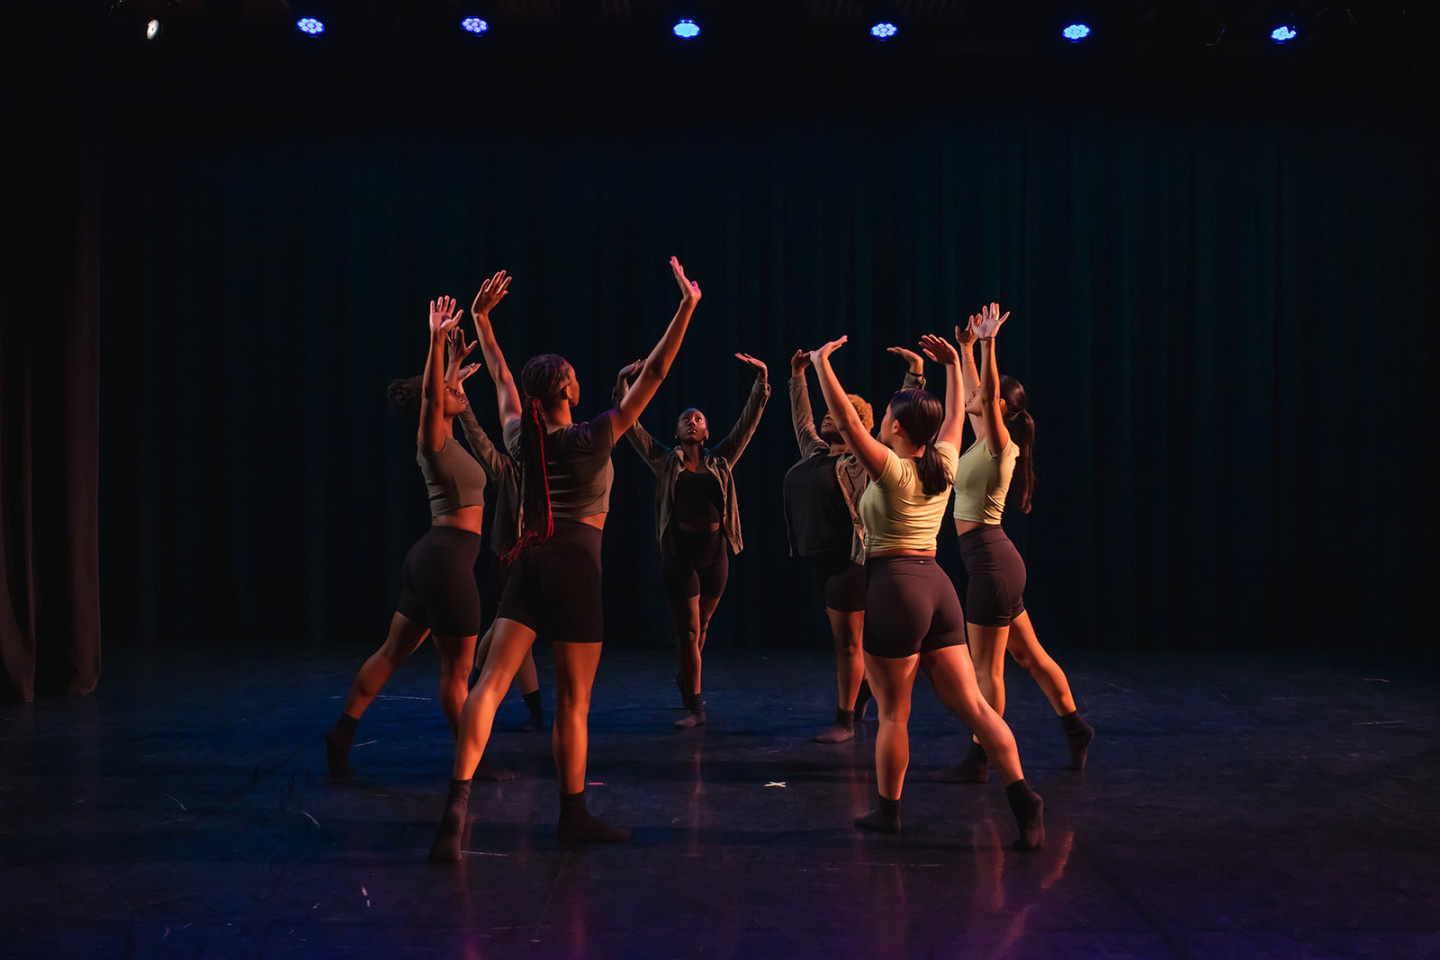 A photo of dancers on stage taken by photographer Lauren Smith.